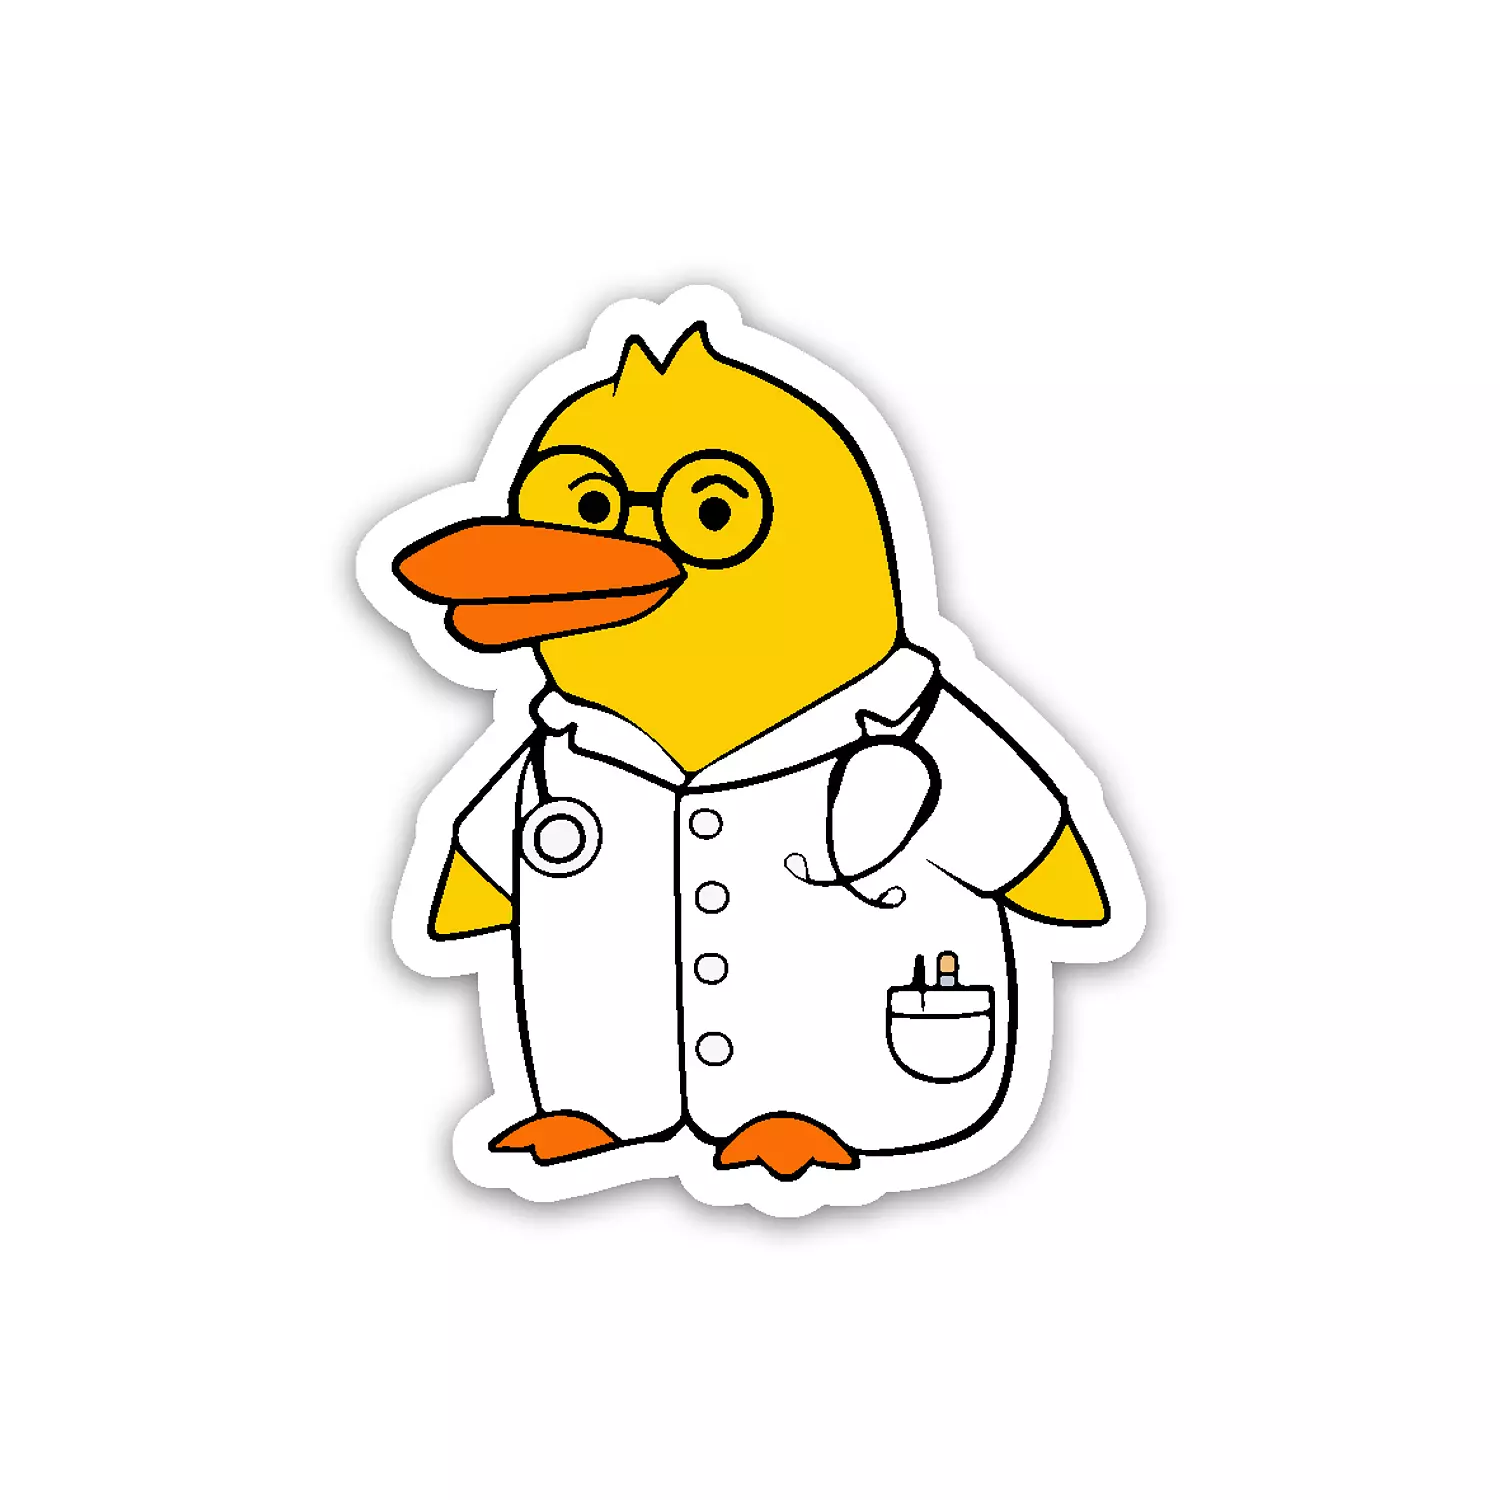 Ducktor 🦆 hover image